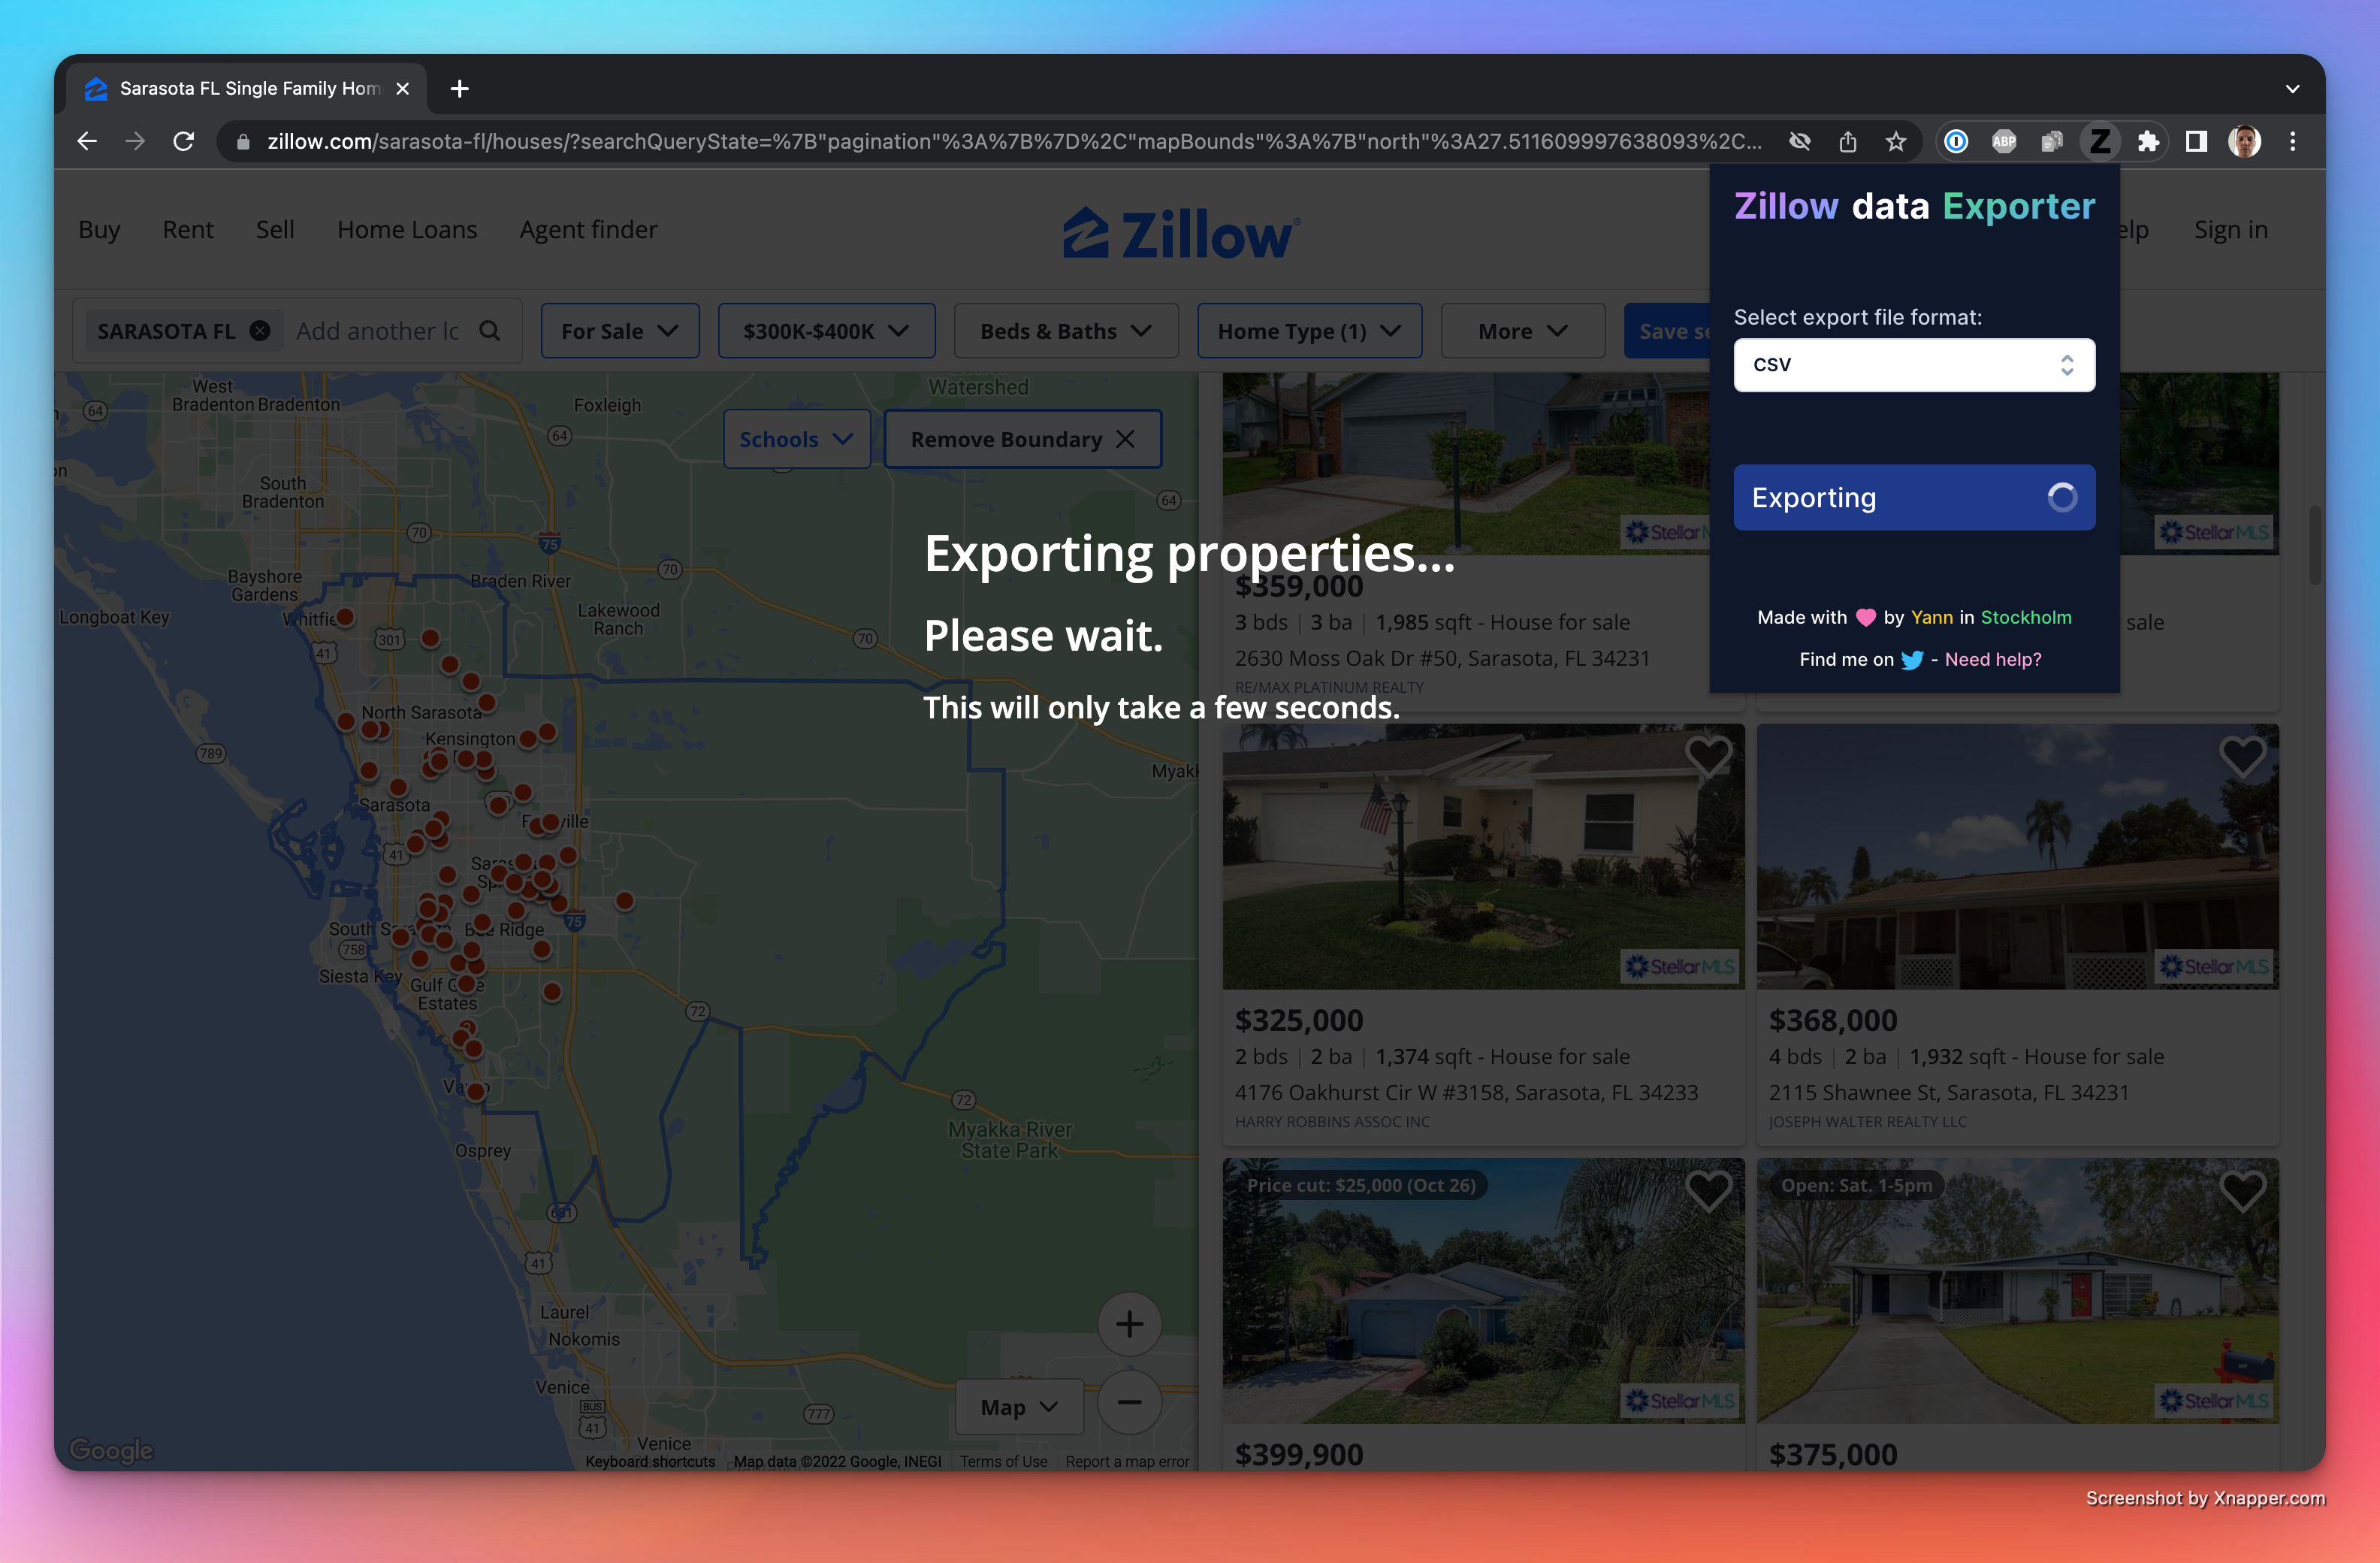 Image of Zillow Data Exporter Chrome extension with the Export properties button clicked